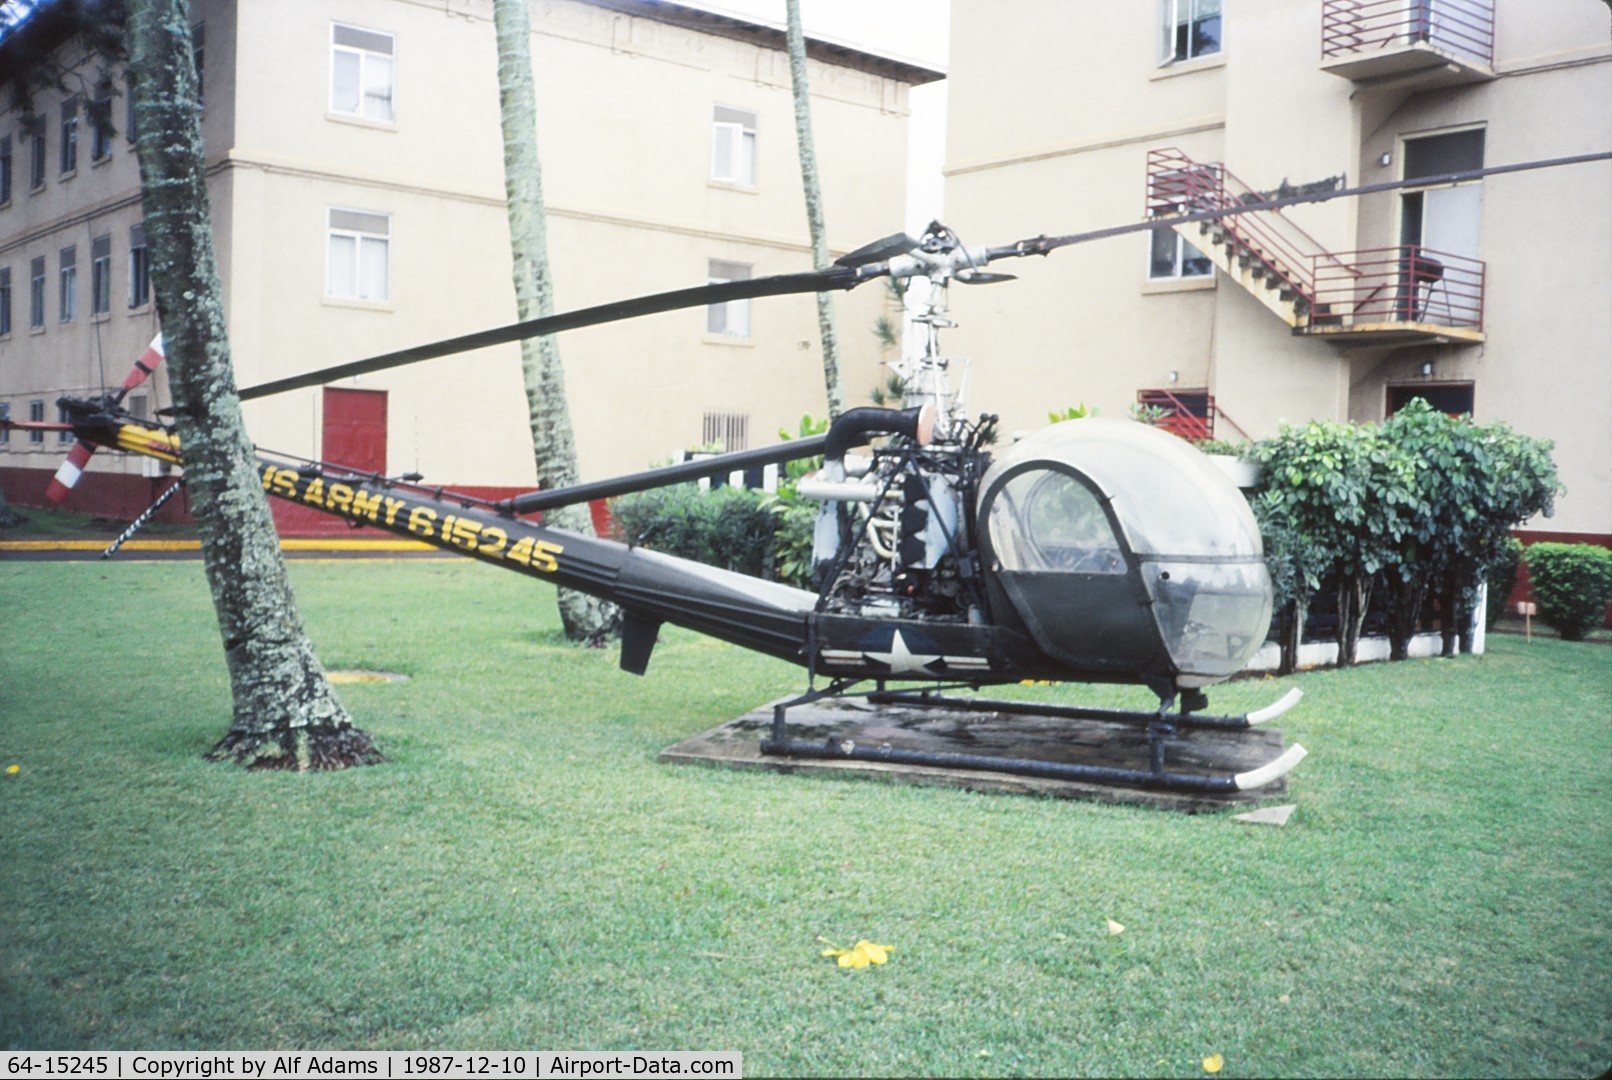 64-15245, 1964 Hiller OH-23G Raven C/N 1754, Displayed outside at Schofield Barracks, Hawaii in 1987.